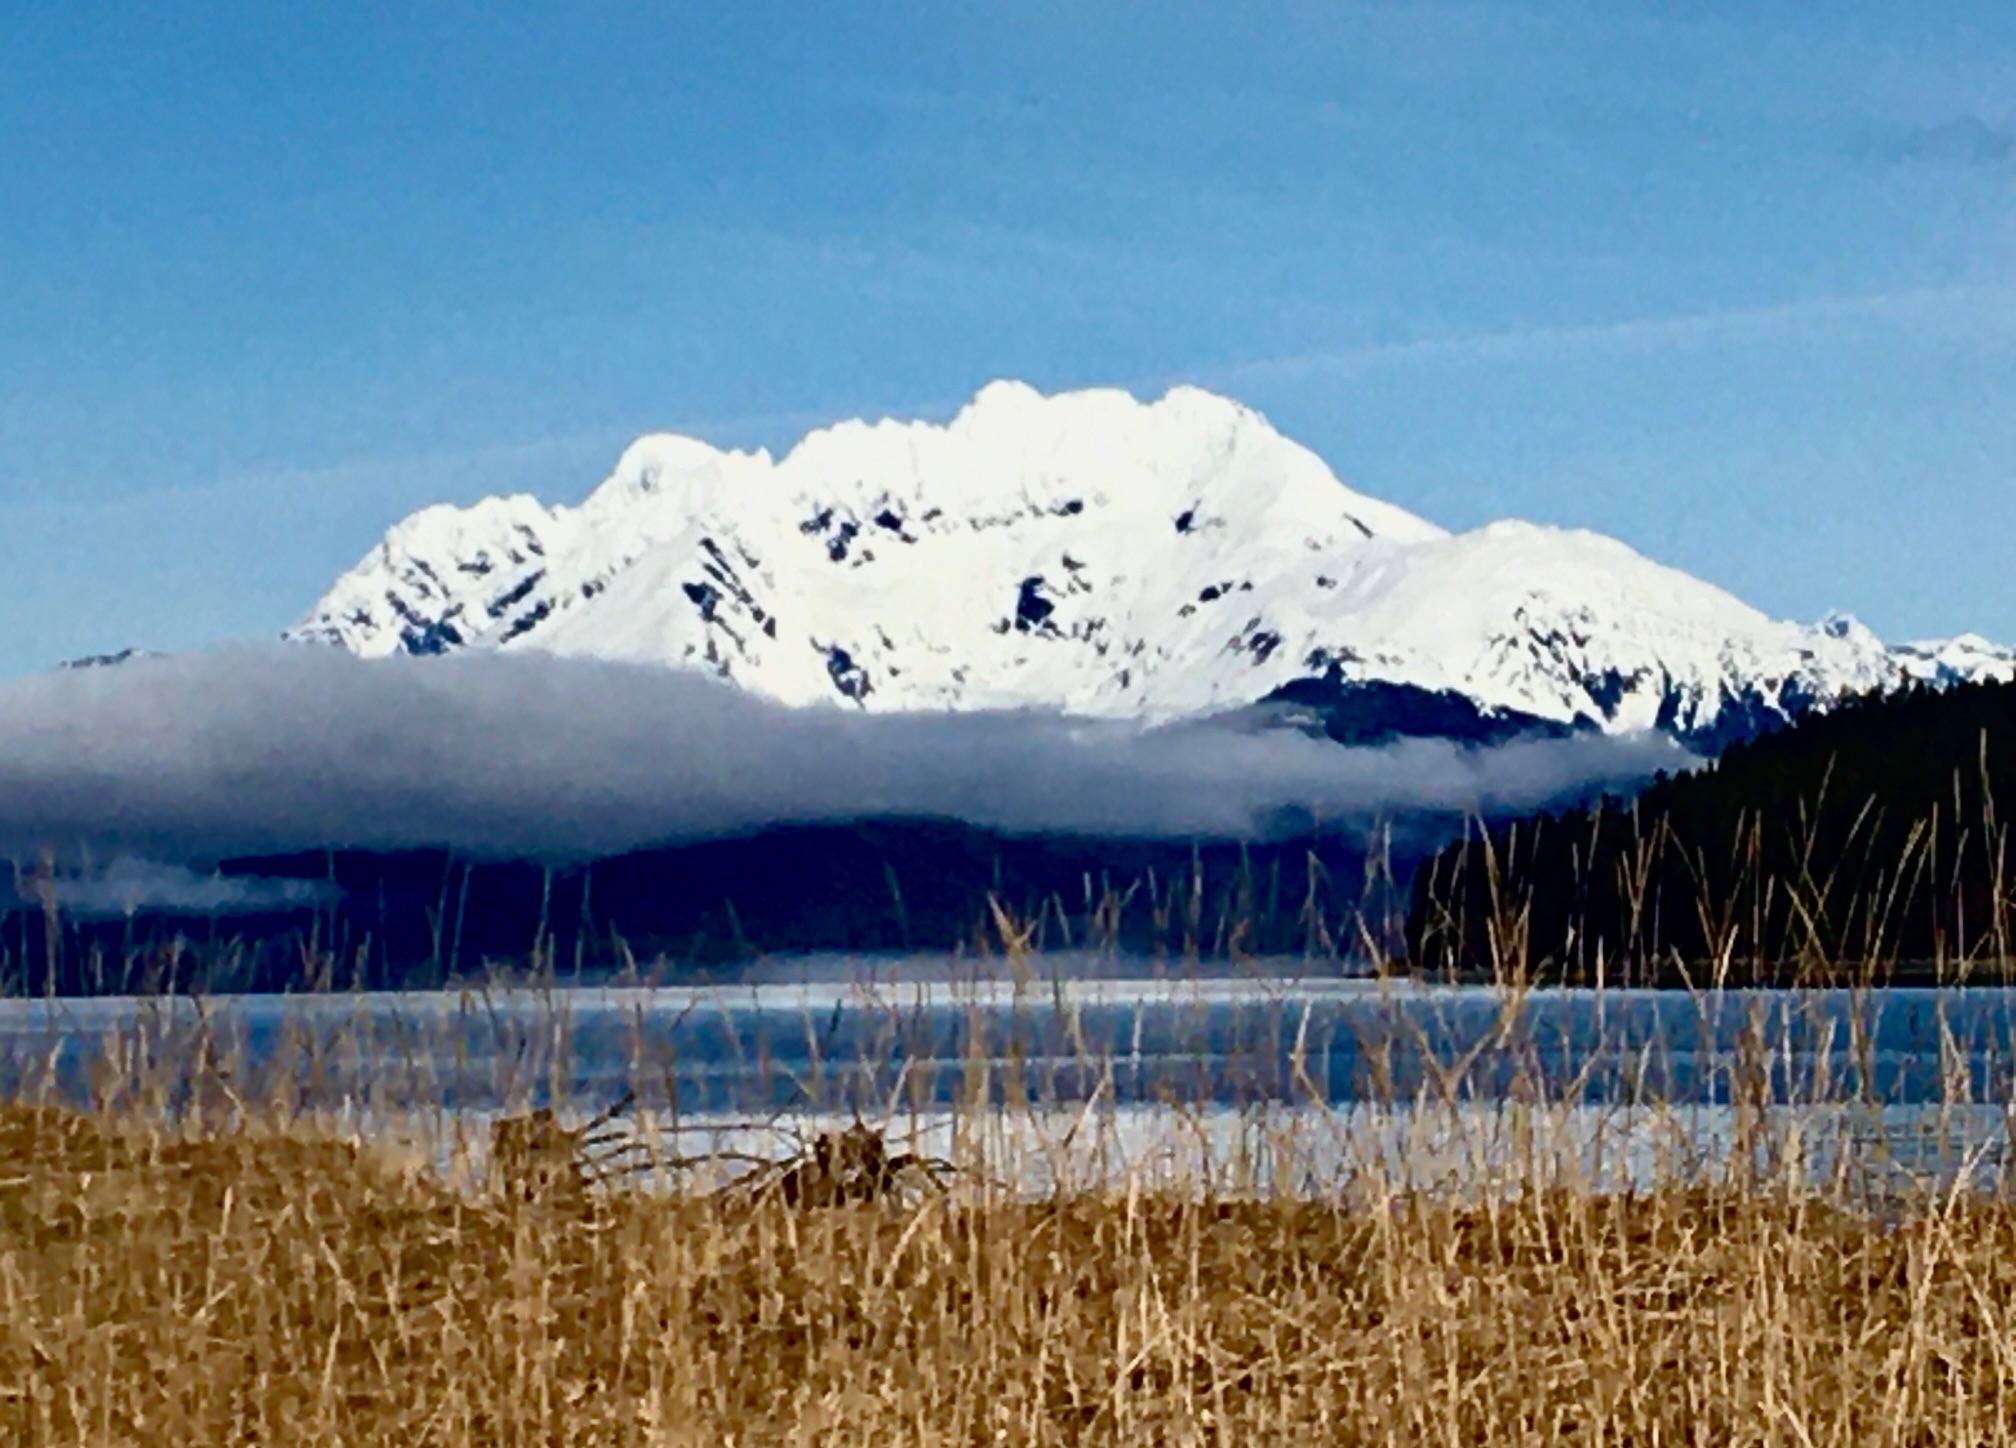 Lion’s Head mountain looms above a thick morning fog bank as seen from Echo Cove on April 17, 2020. (Courtesy Photo | Denise Carroll)